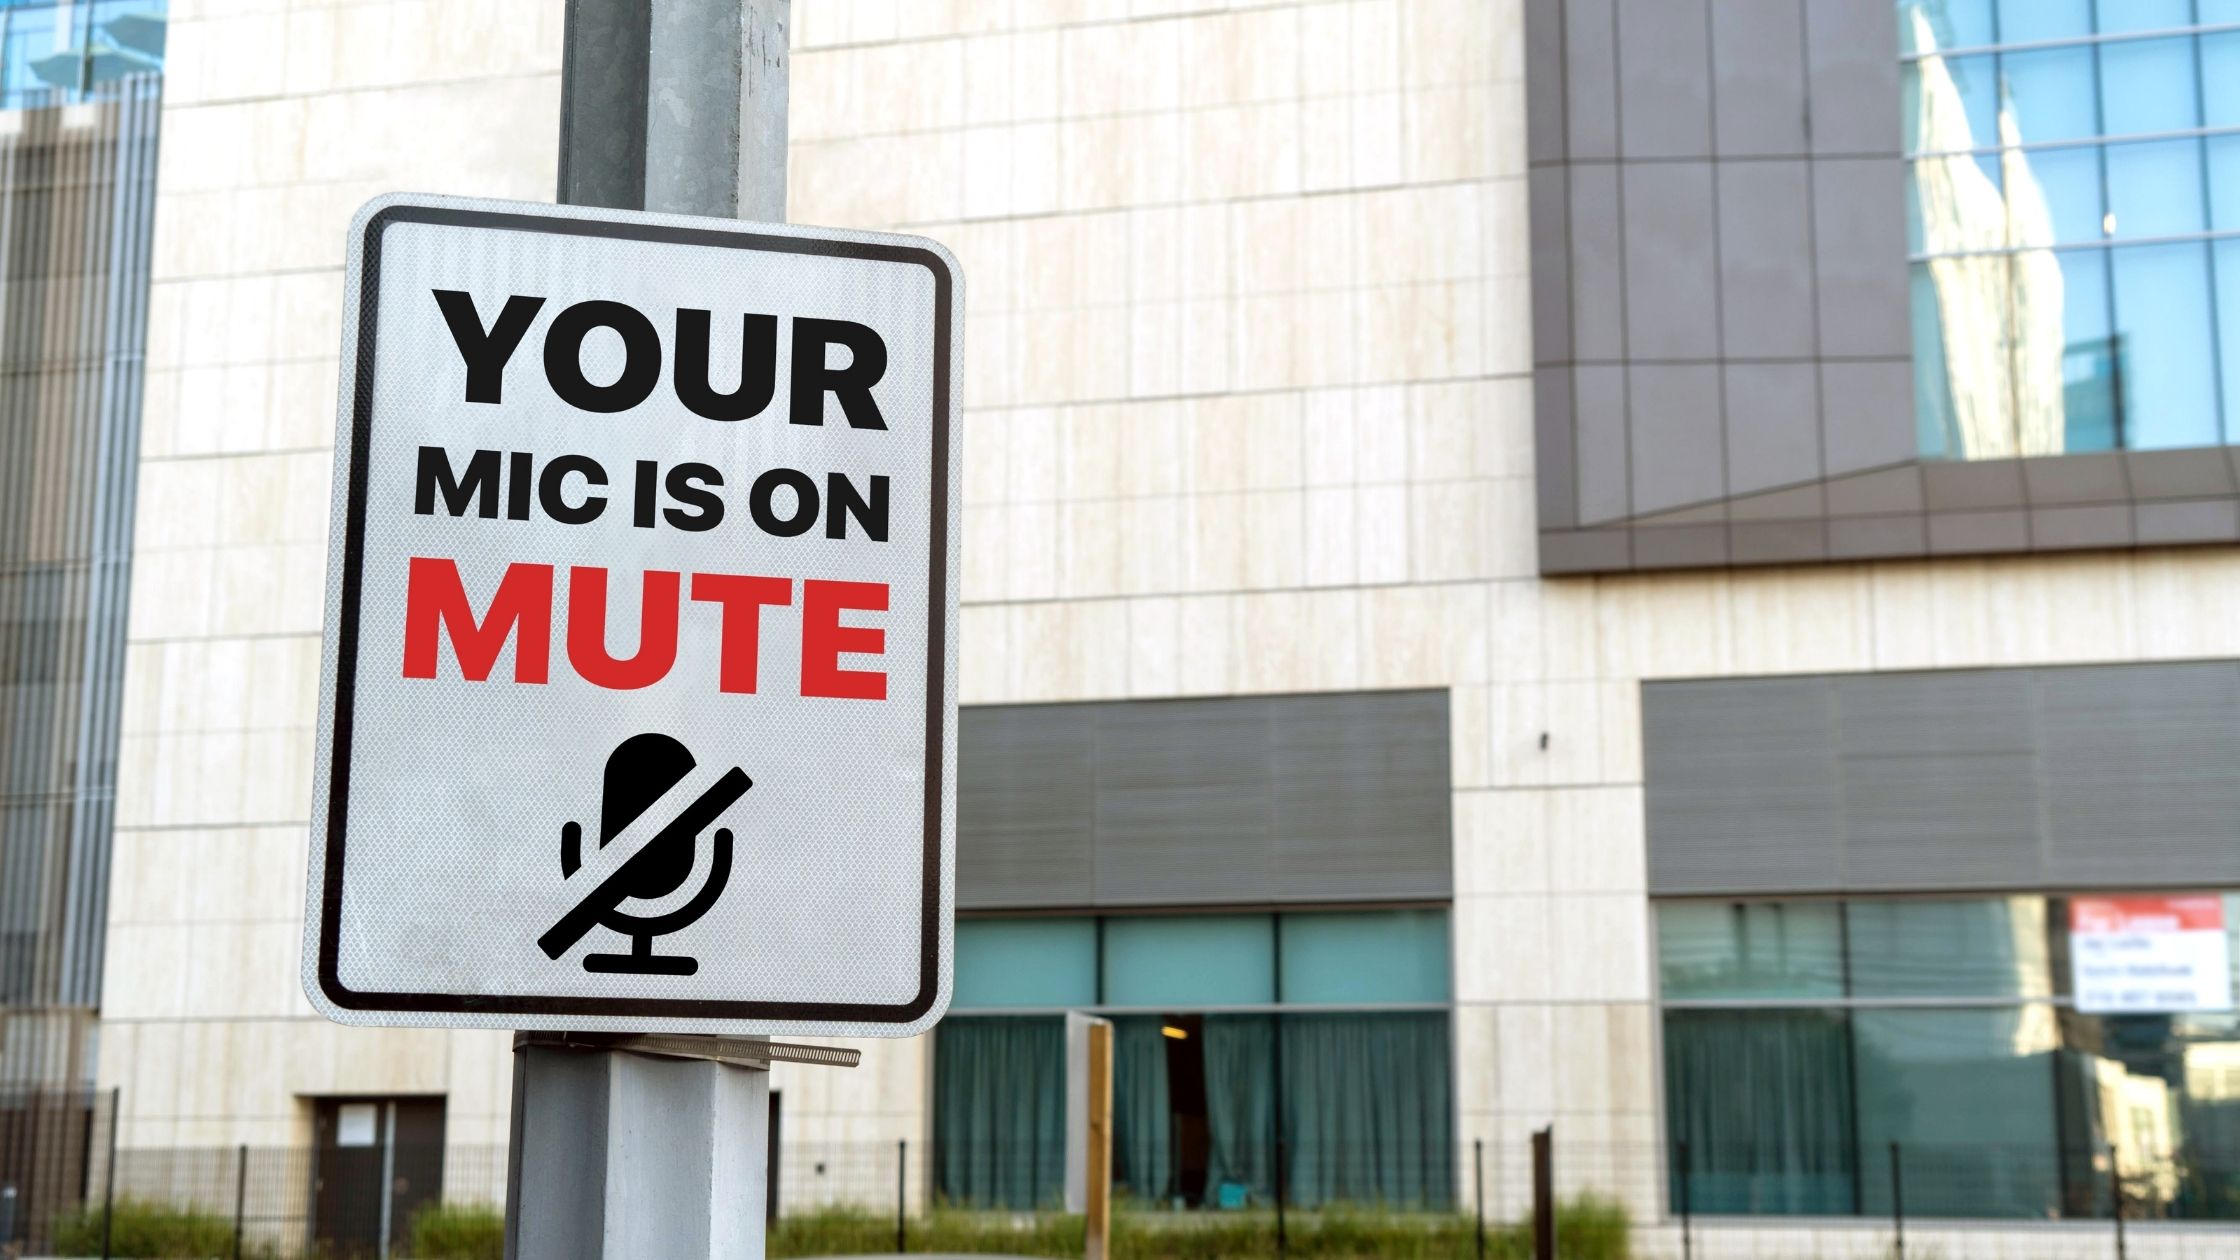 A traffic sign that says "Your mic is on mute".